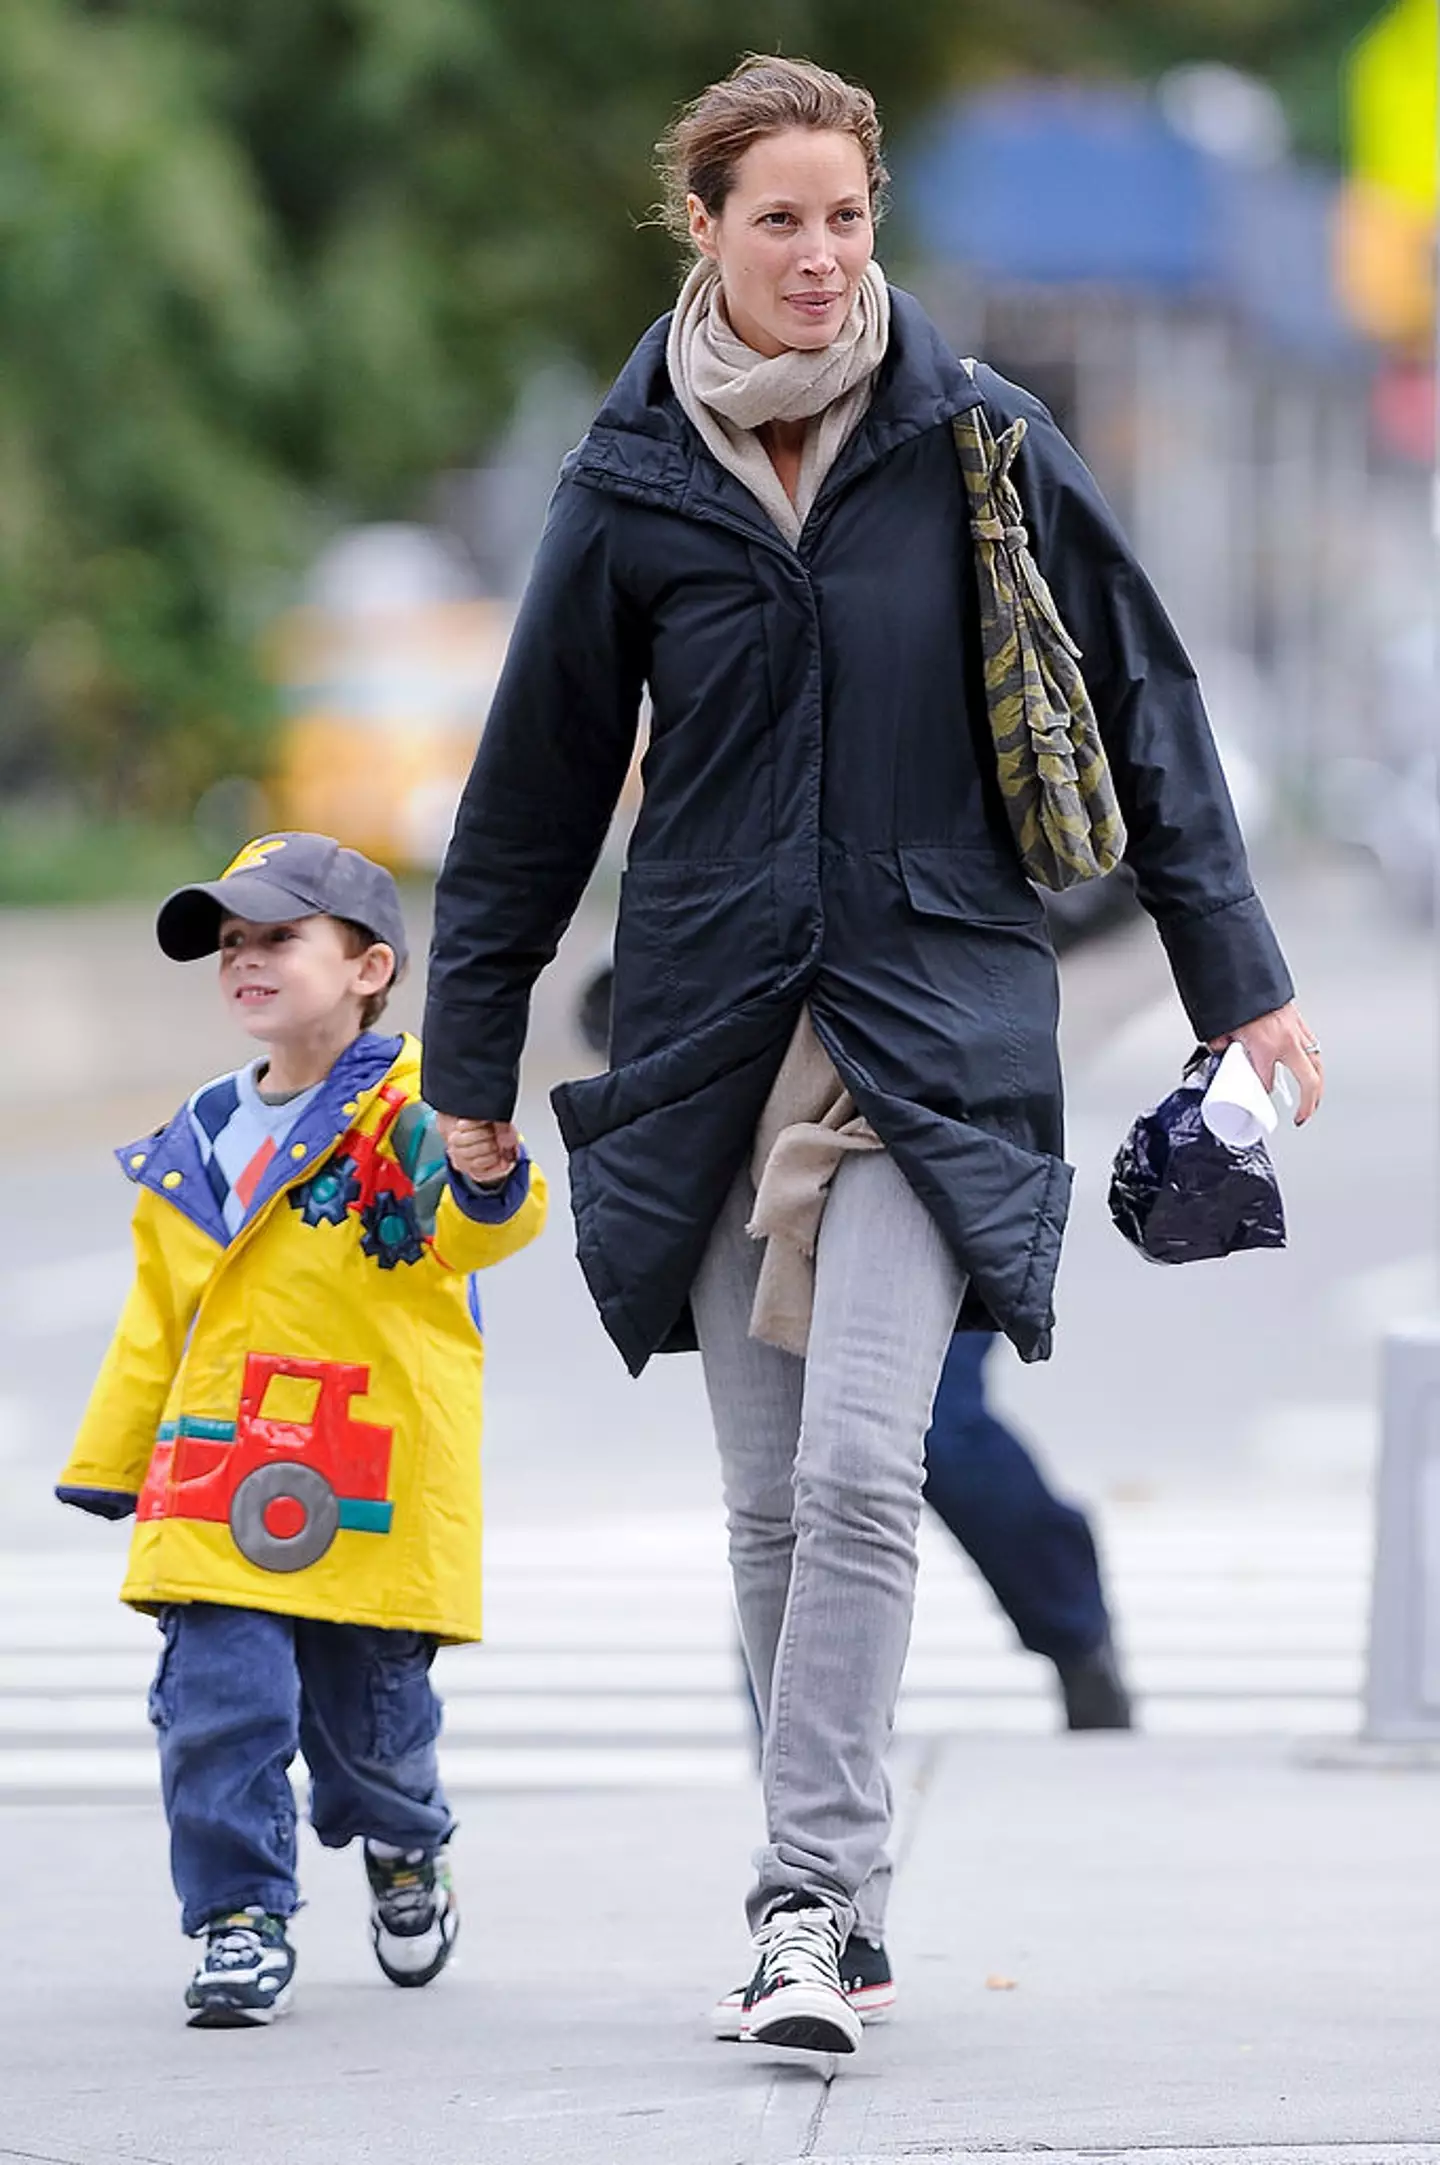 Christy and her son in 2010. (Ray Tamarra/Getty Images)